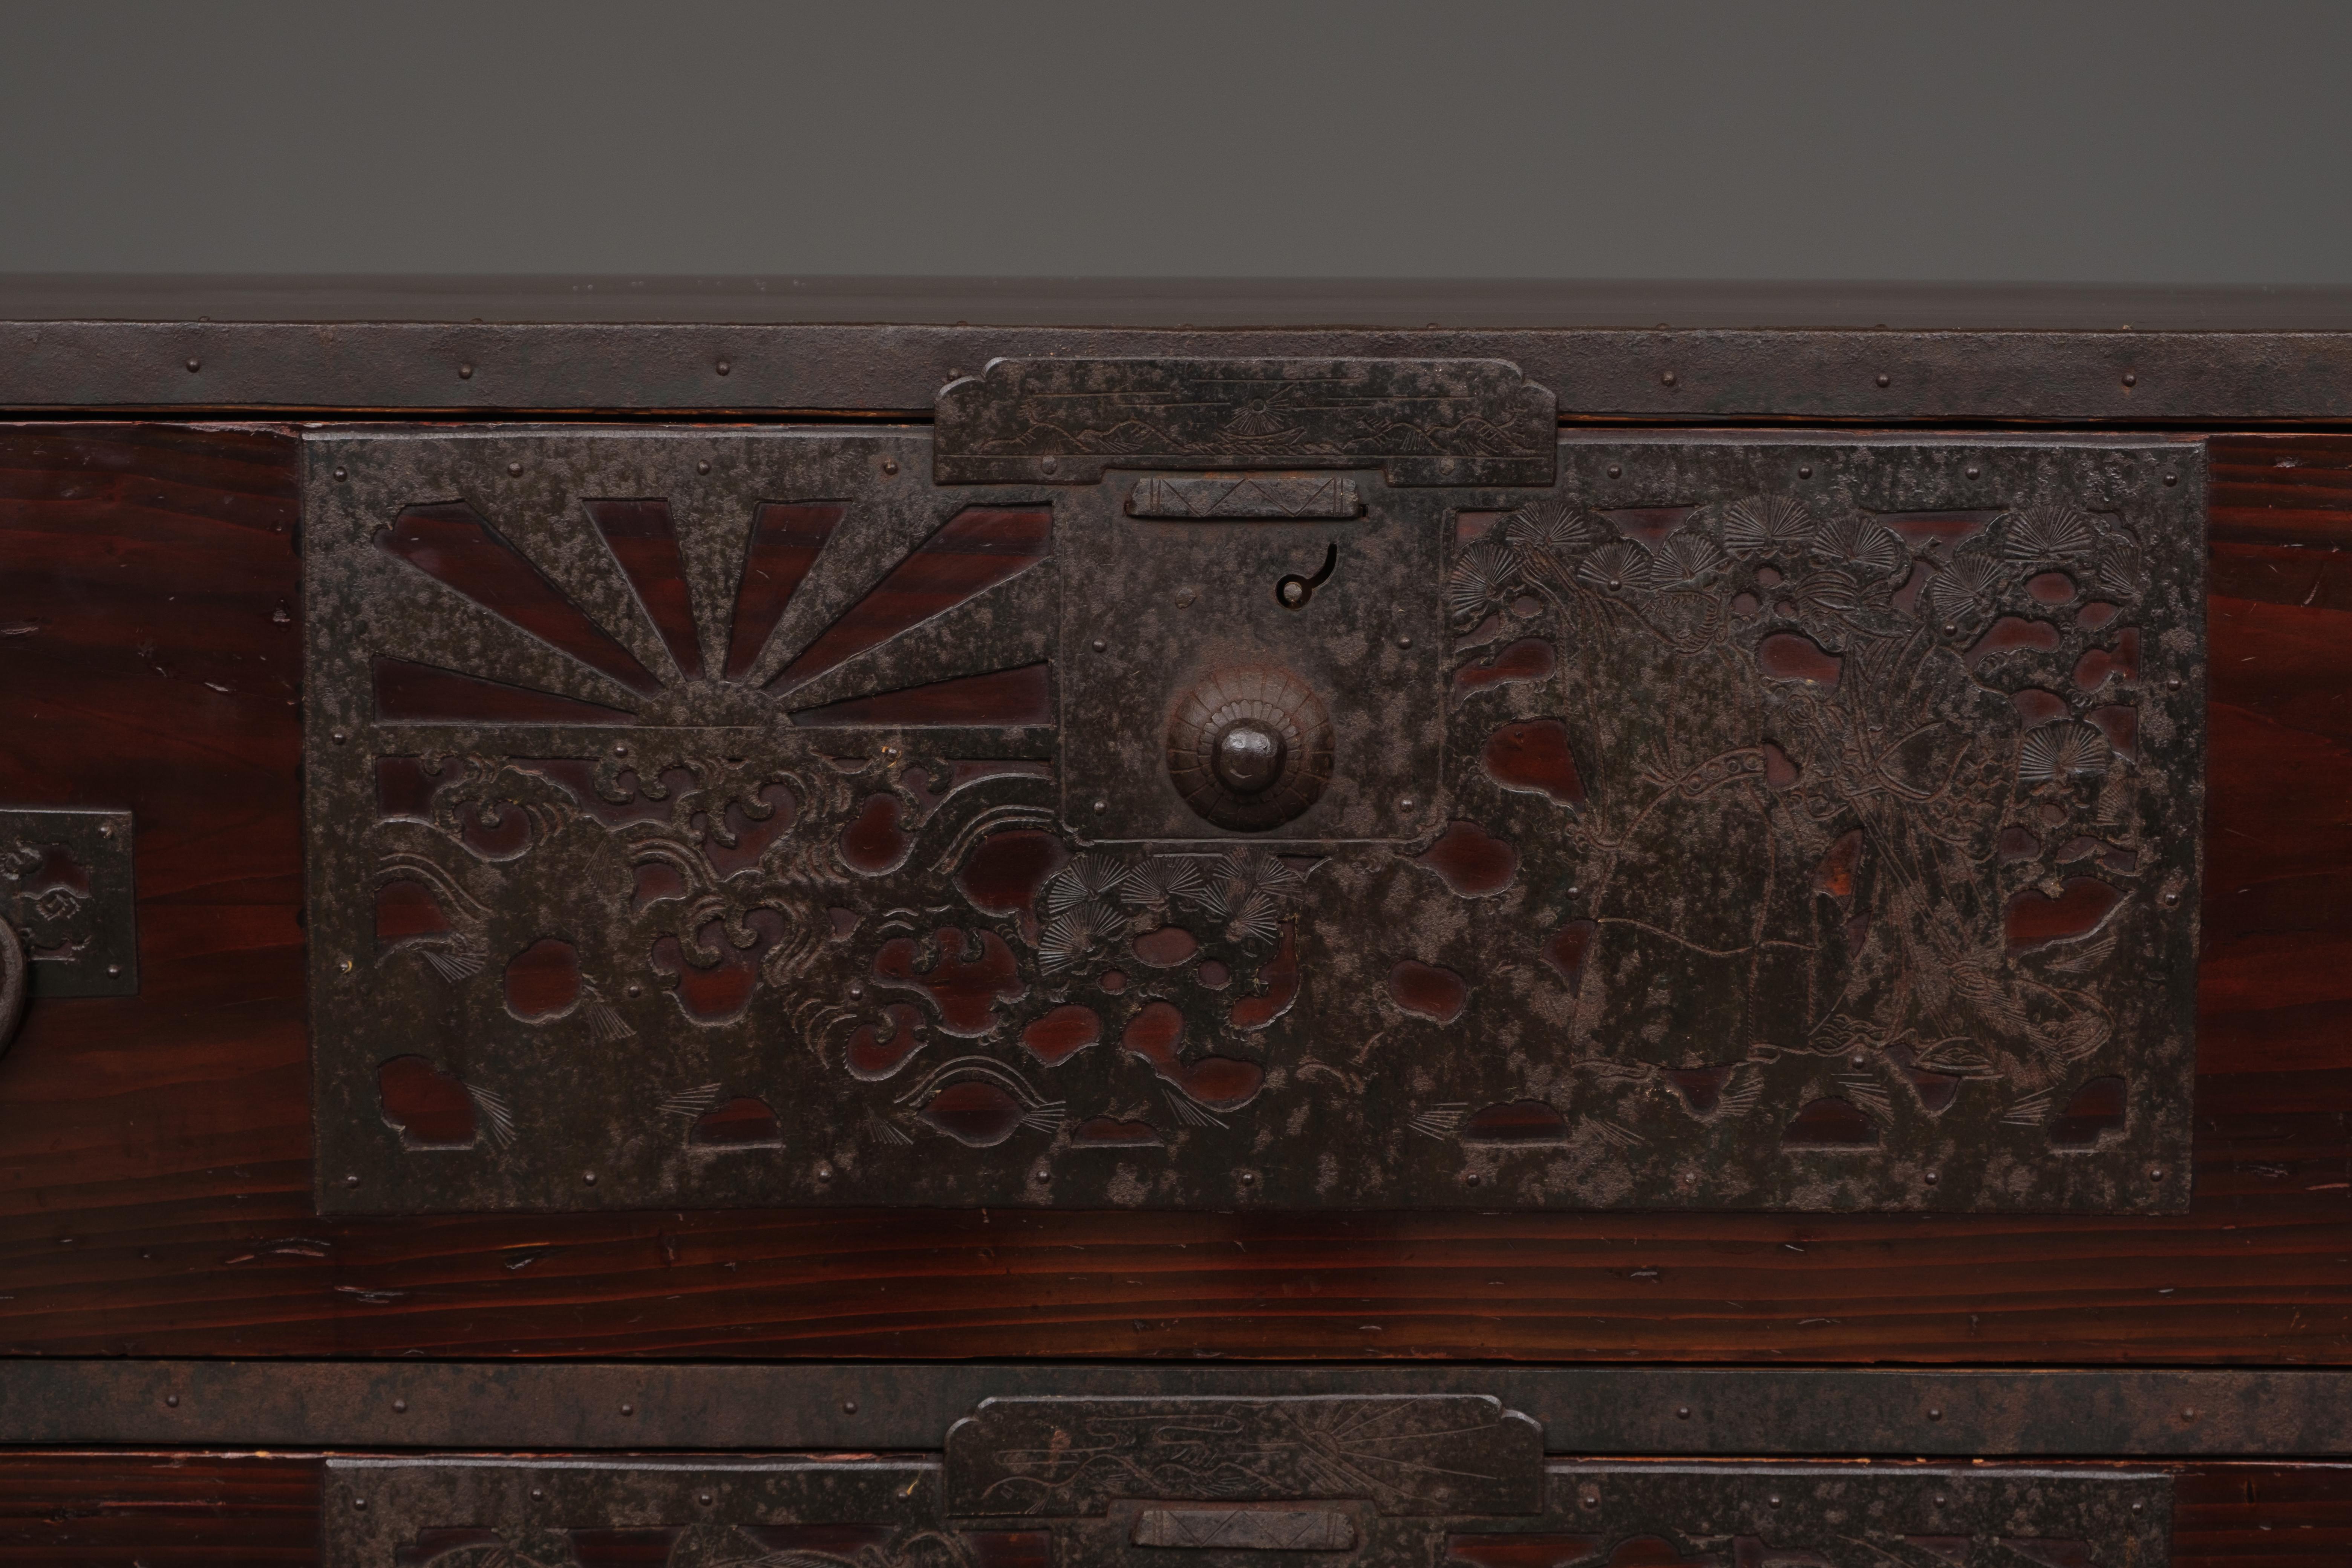 High-quality Sado wooden ishô’dansu (cabinet of drawers) in two sections. Heavily clad with decorative iron hardware featuring rich designs, and a little secret. Fully restored, cleaned and waxed.

The drawer faces made from solid indigenous cedar